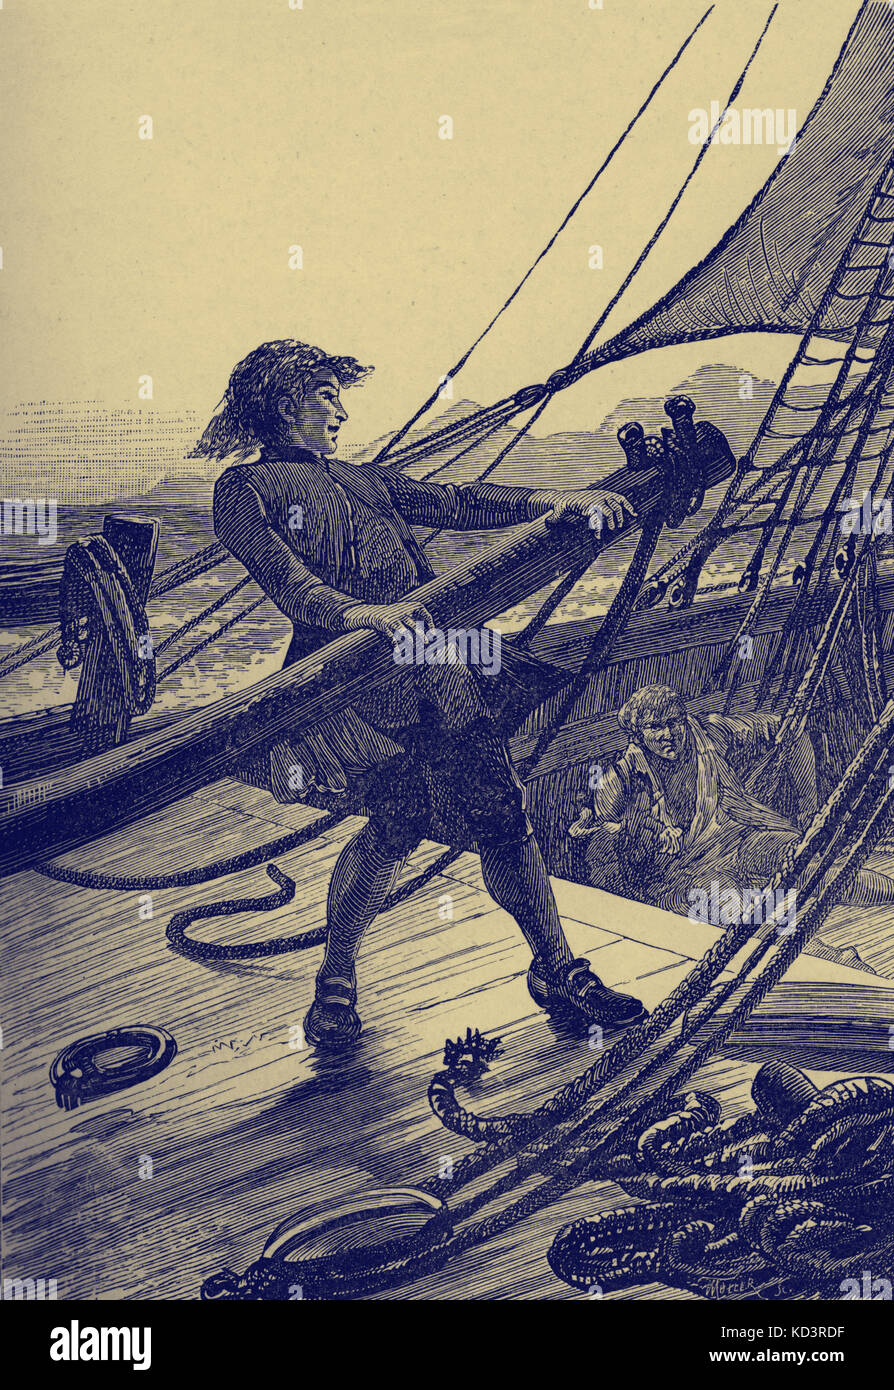 Treasure Island by Robert Louis Stevenson. Caption reads: 'I put the helm hard up, and the Hispaniola swung round rapidly.' (Jim Hawkins' return to the Hispaniola.) Chapter XXVI Israel Hands. First Published in 1881-82. RLS: Scottish novelist, poet, and travel writer, 13 November 1850 – 3 December 1894. Stock Photo